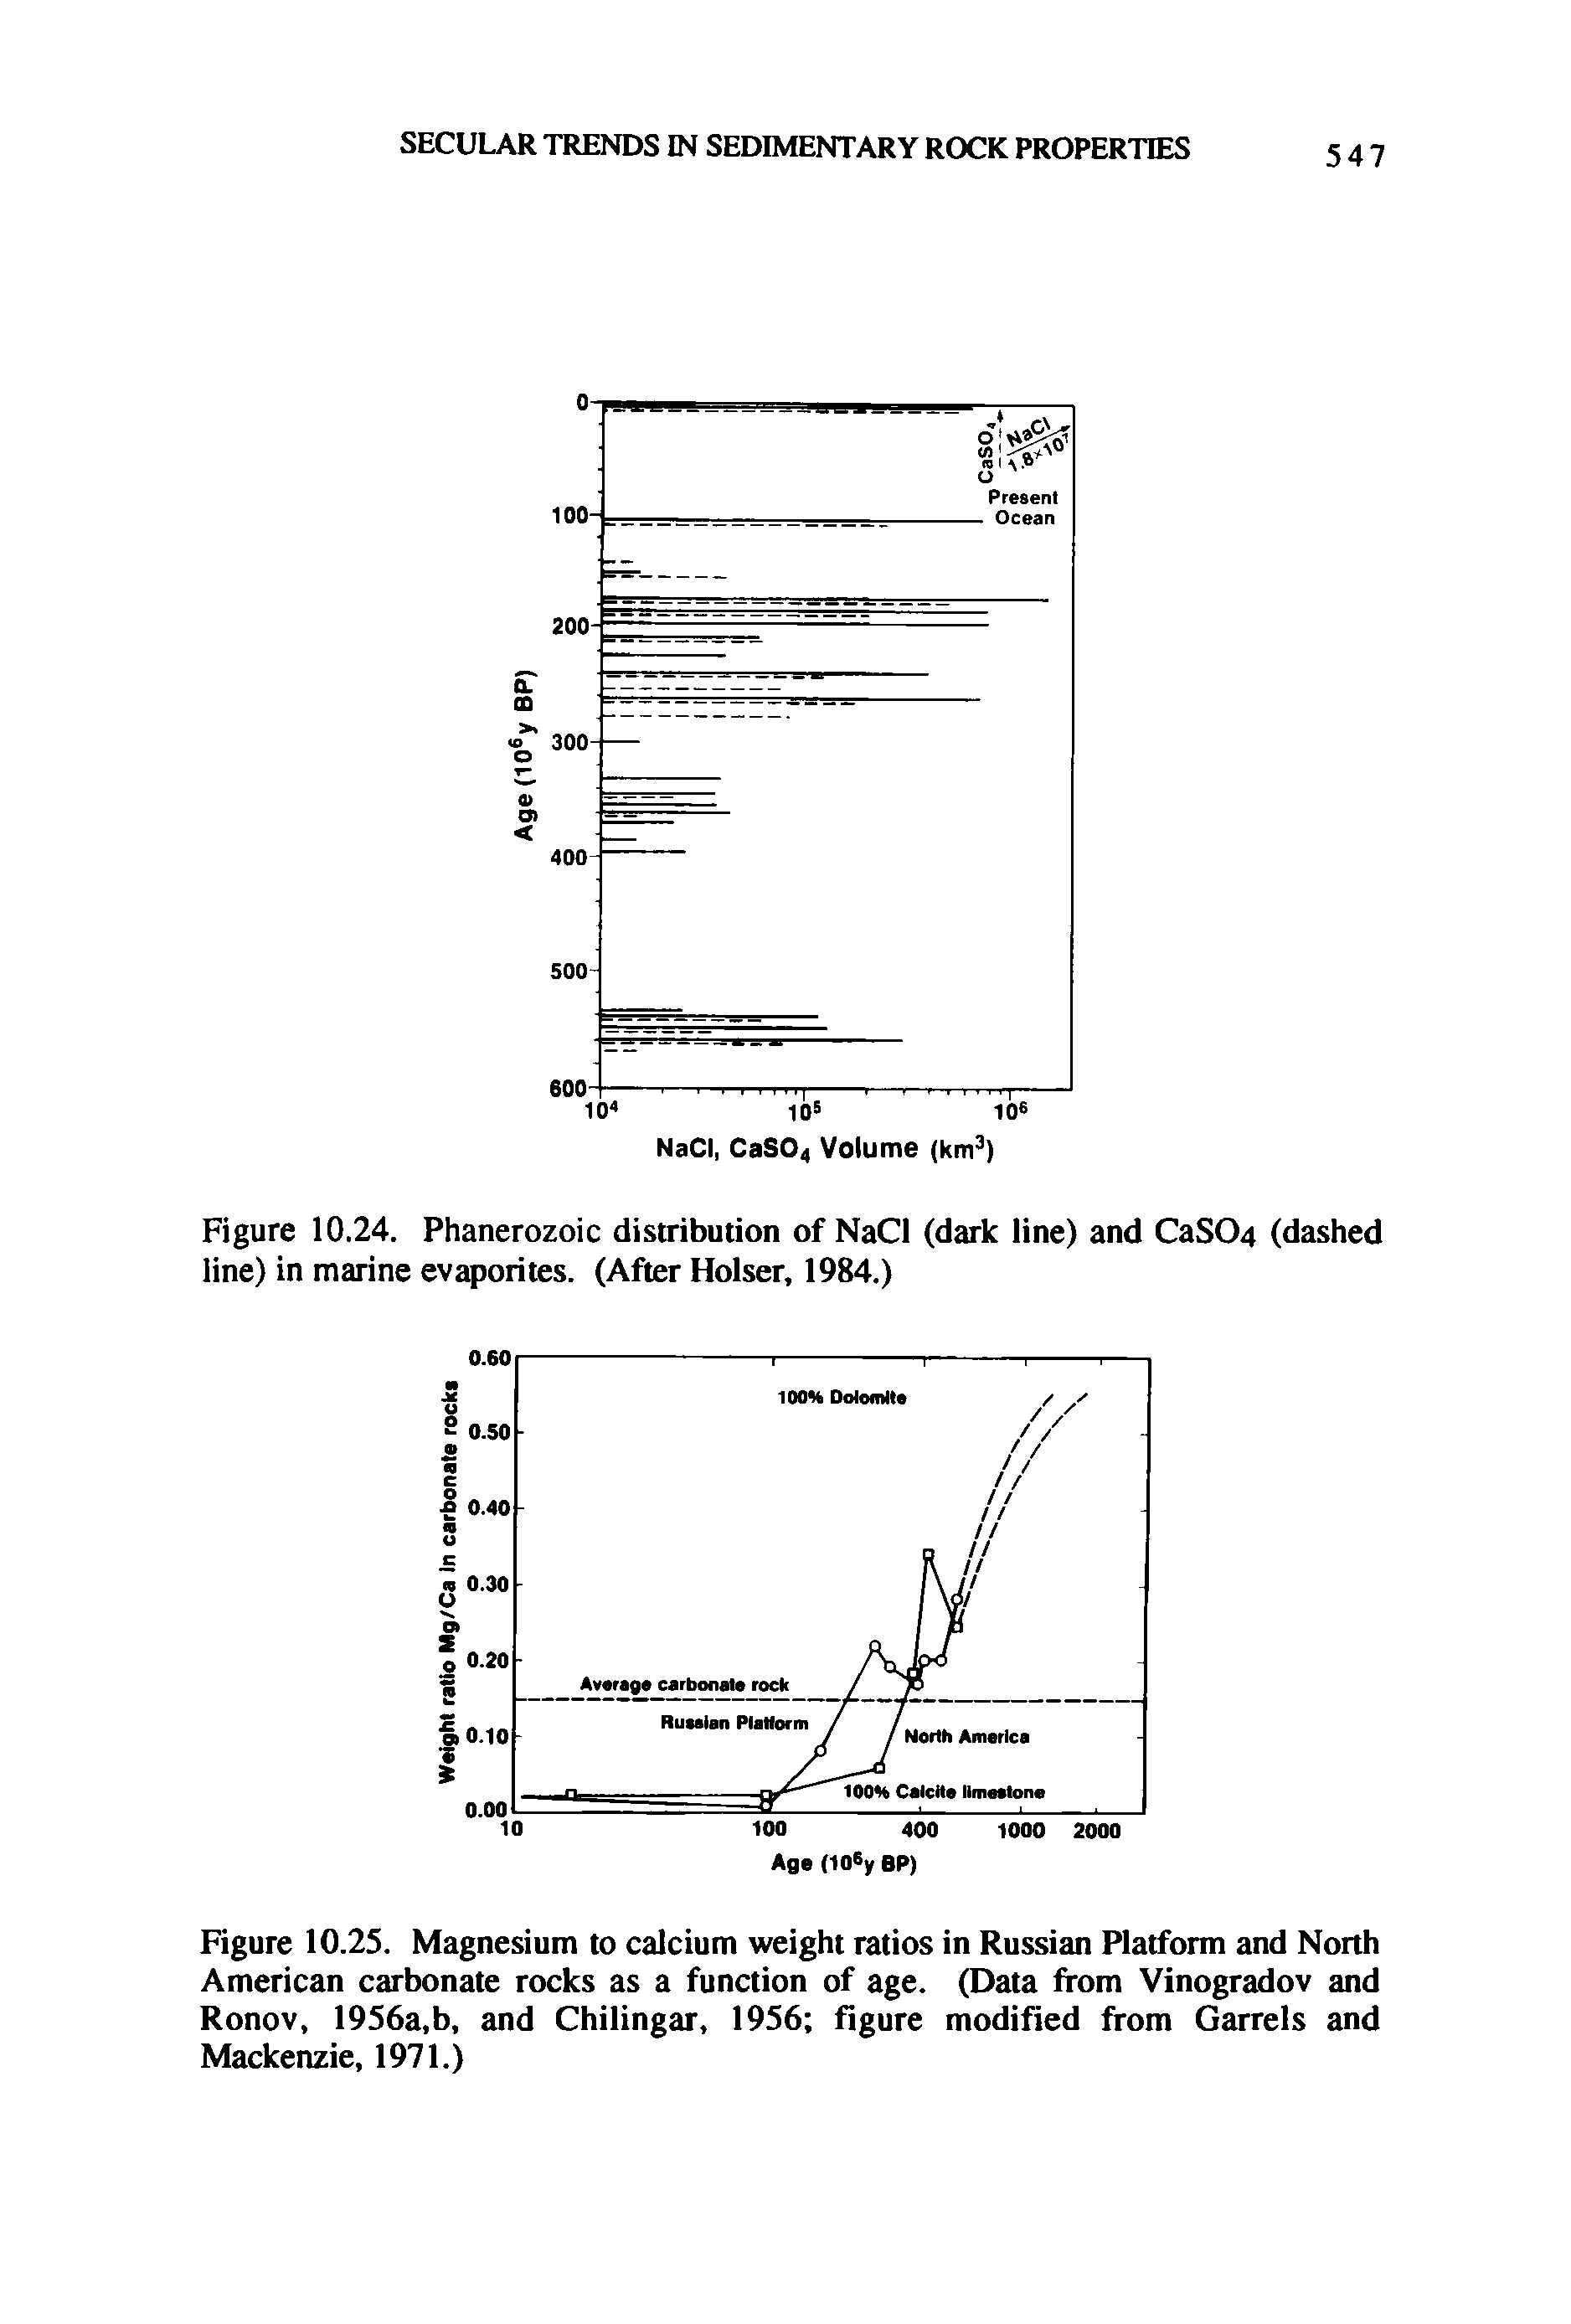 Figure 10.25. Magnesium to calcium weight ratios in Russian Platform and North American carbonate rocks as a function of age. (Data from Vinogradov and Ronov, 1956a,b, and Chilingar, 1956 figure modified from Garrels and Mackenzie, 1971.)...